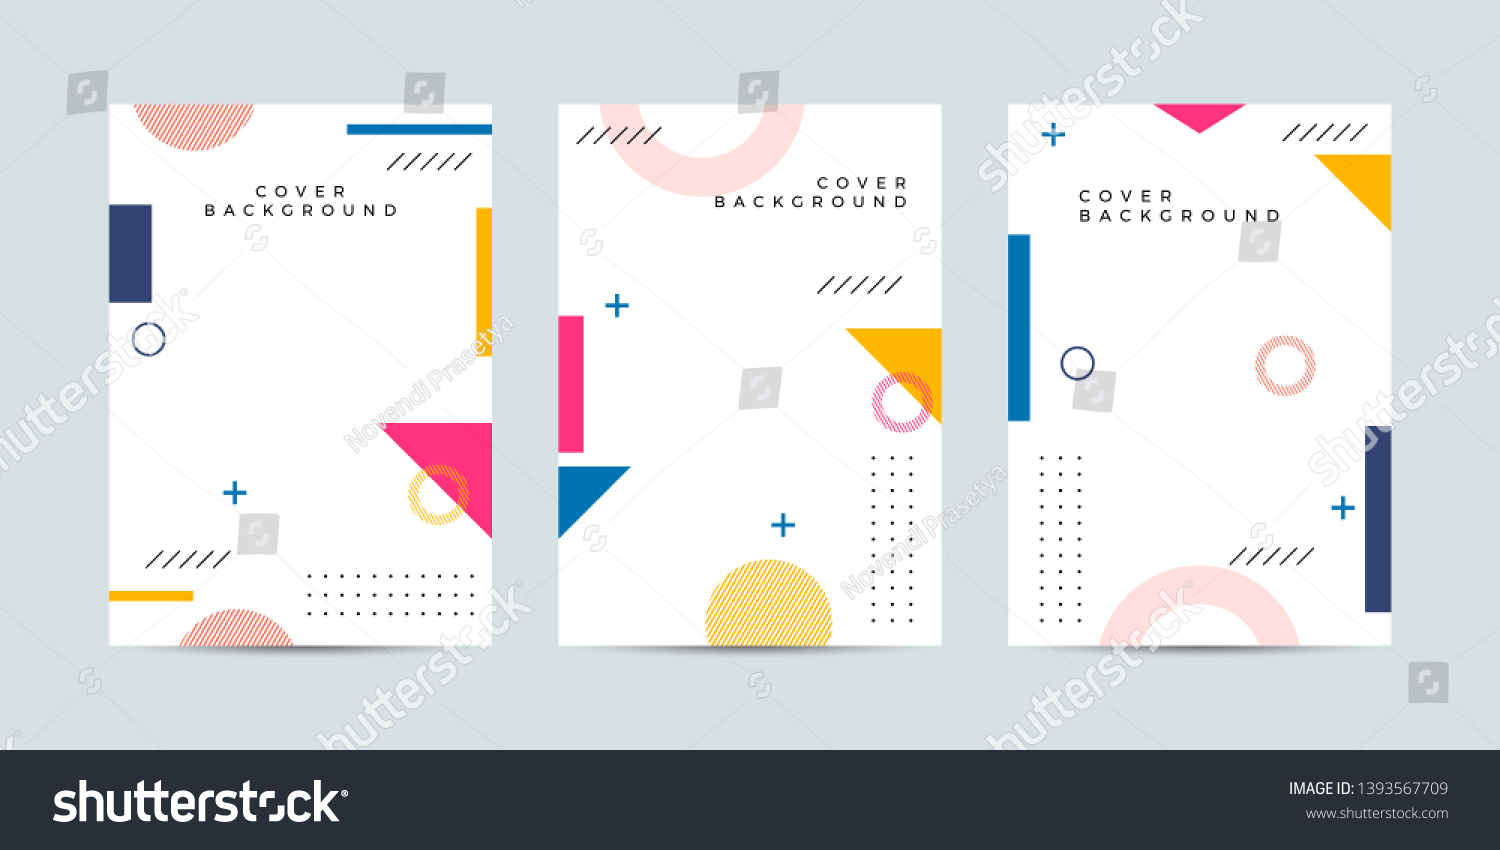 SVG of Covers with minimal design. Cool geometric backgrounds for your design. Applicable for Banners, Placards, Posters, Flyers etc. Eps10 vector svg